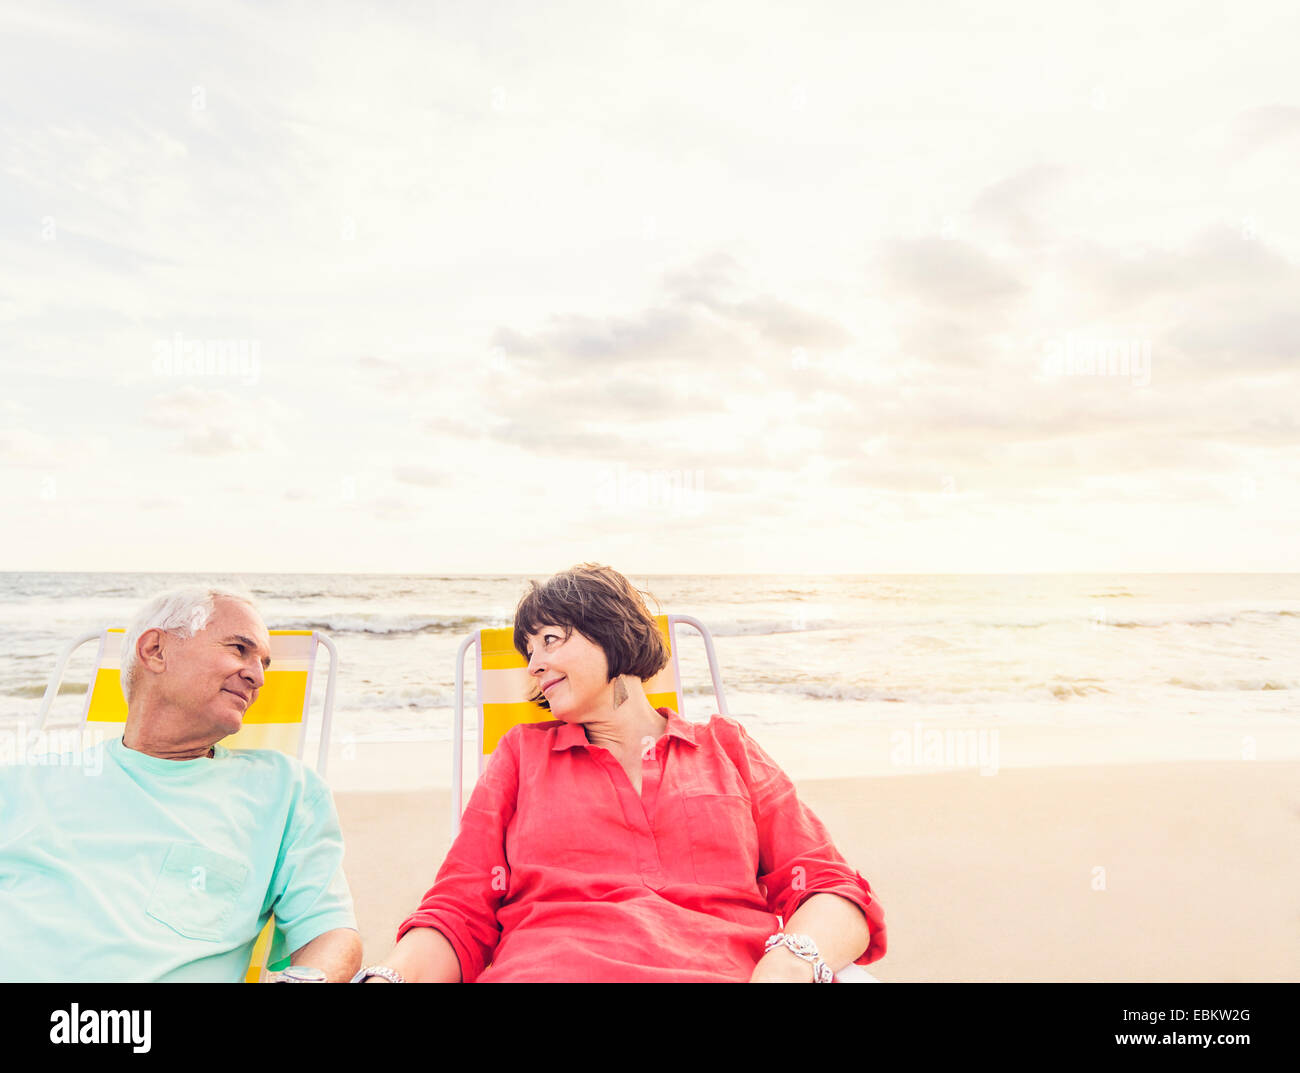 USA, Floride, Jupiter, vieux couple relaxing on beach Banque D'Images